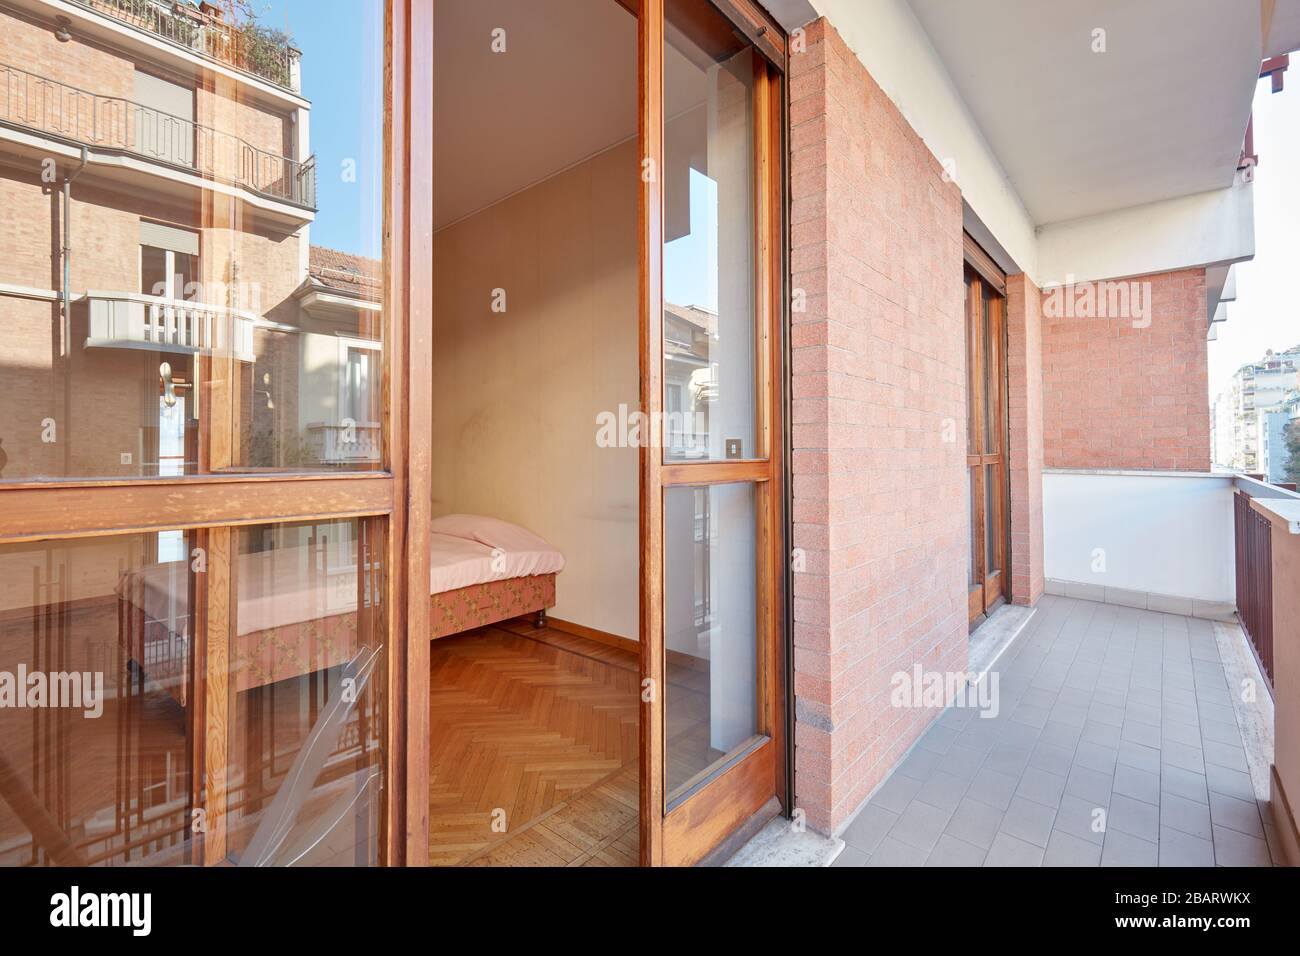 Balcony and bedroom interior view in a sunny day Stock Photo